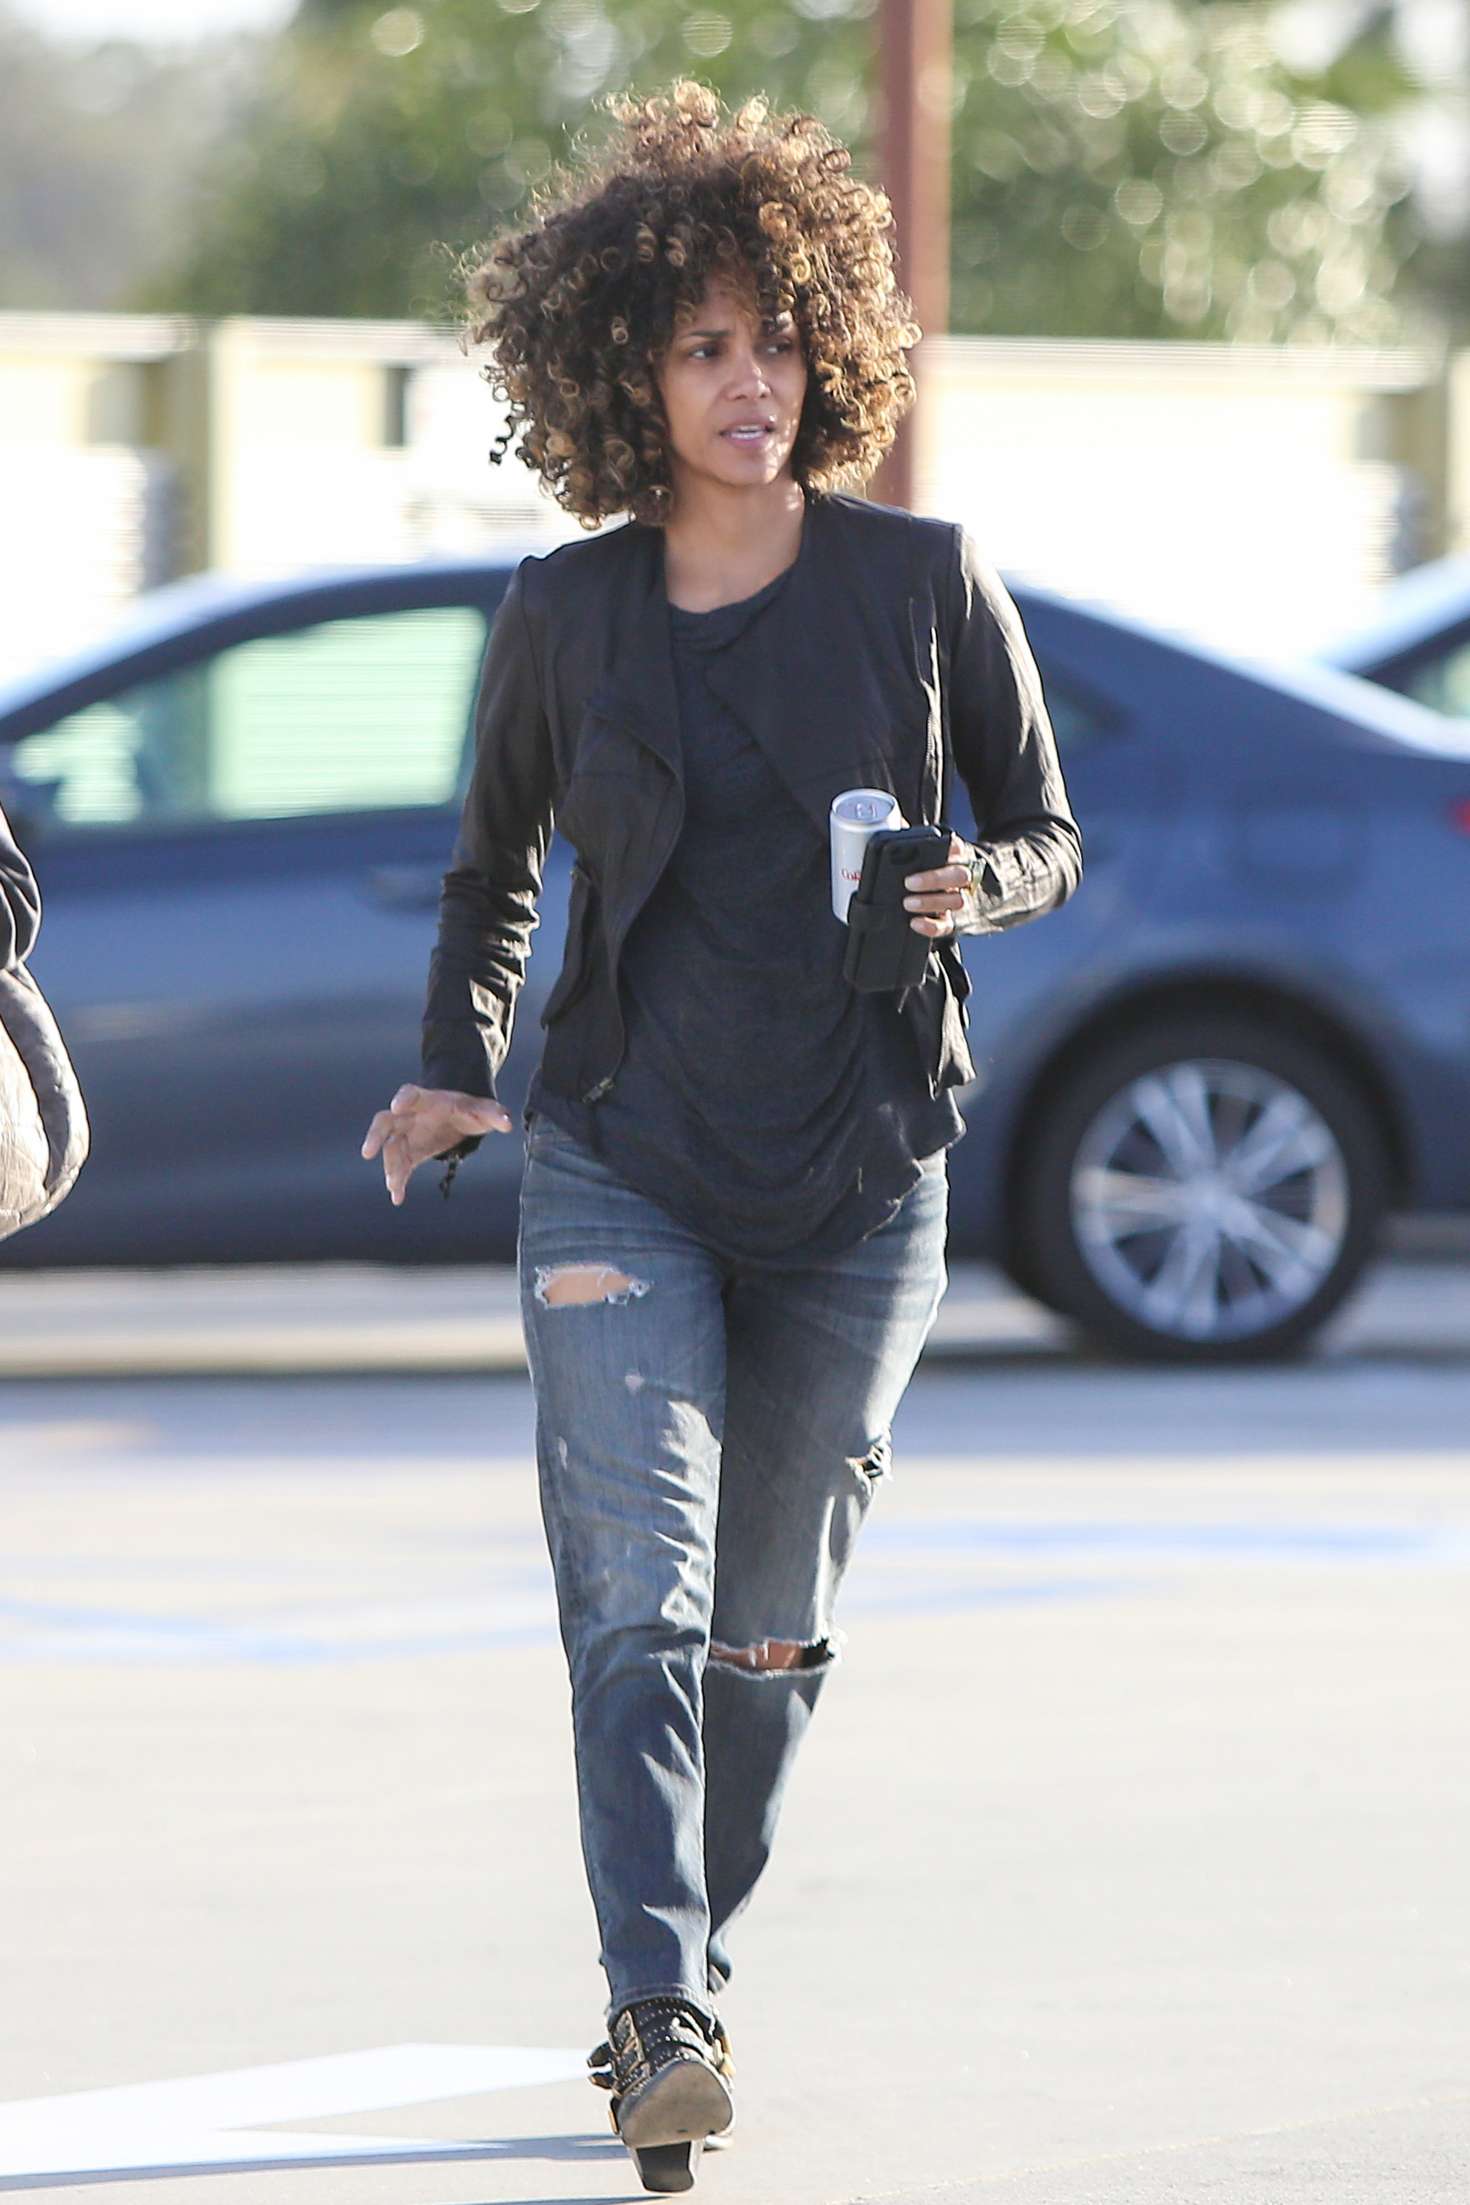 Halle Berry 2017 : Halle Berry in Jeans -06.